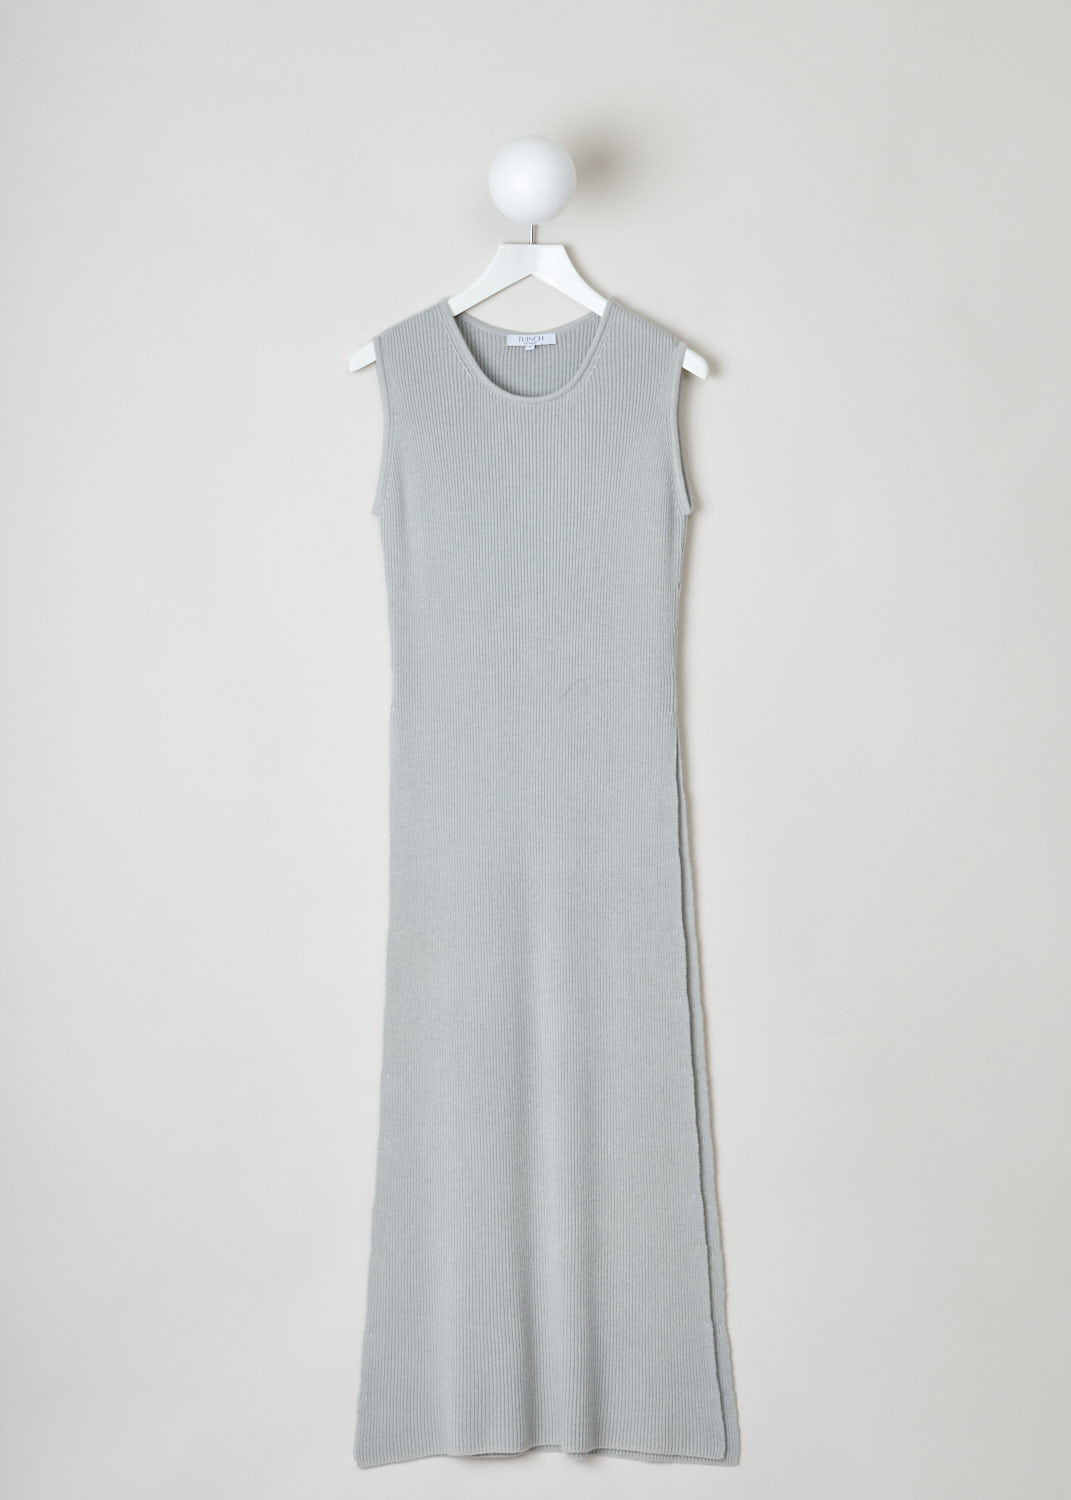 Tuinch, Knitted grey dress, Sumdress_007_grey, grey, front. Maxi-length knitted dress in light grey with a round neckline and no sleeves. This dress has a split on each side that goes up hip height.  